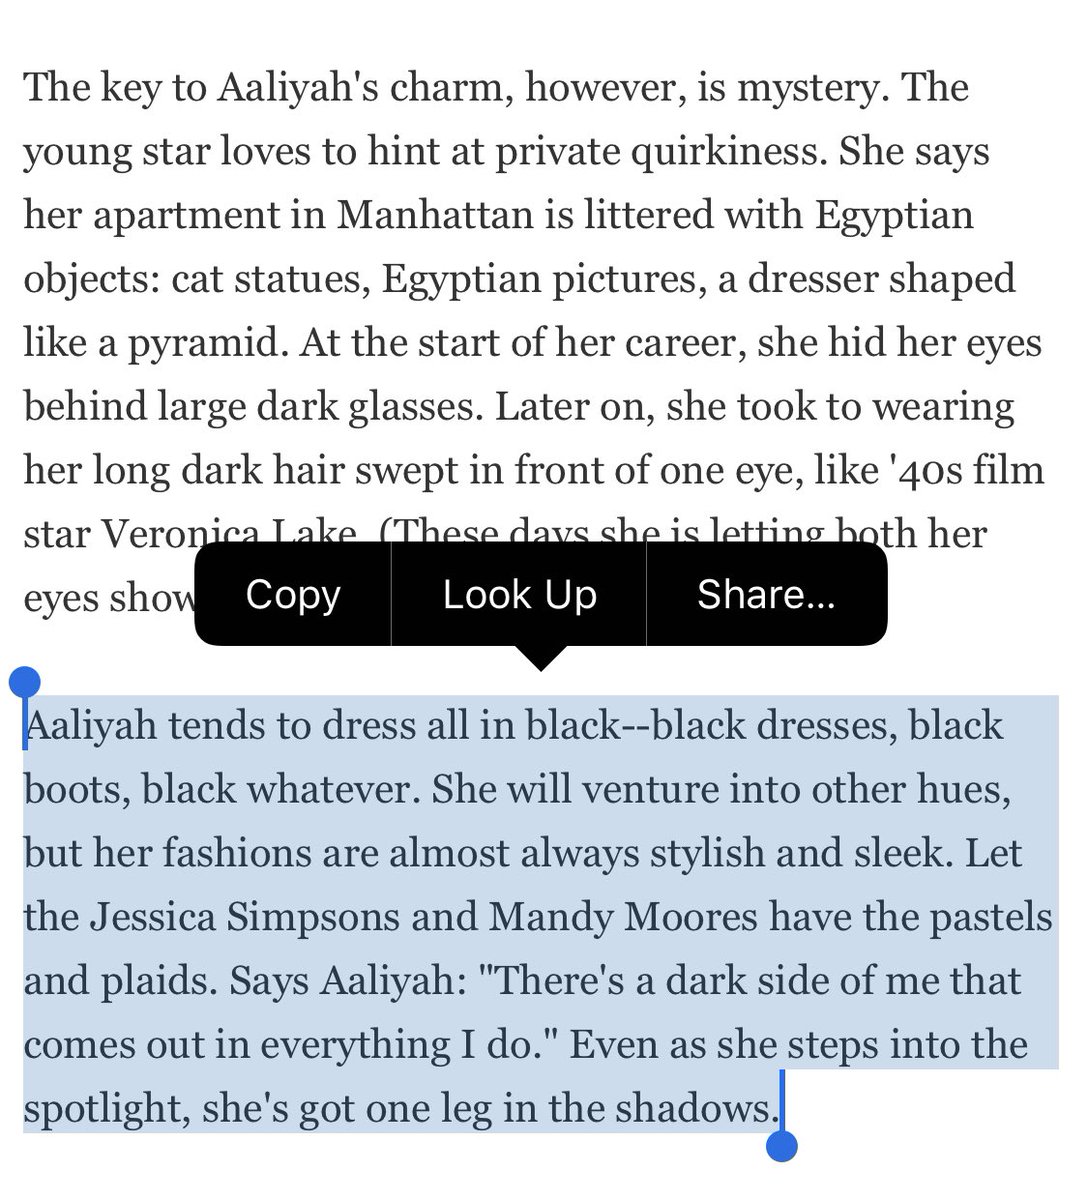 This TIME magazine article, written in 2001, refers to Aaliyah being mysterious, her sound being “gritty” and how she’s not like the other pop girls. Oh, and DARK.  http://content.time.com/time/magazine/article/0,9171,168489,00.html